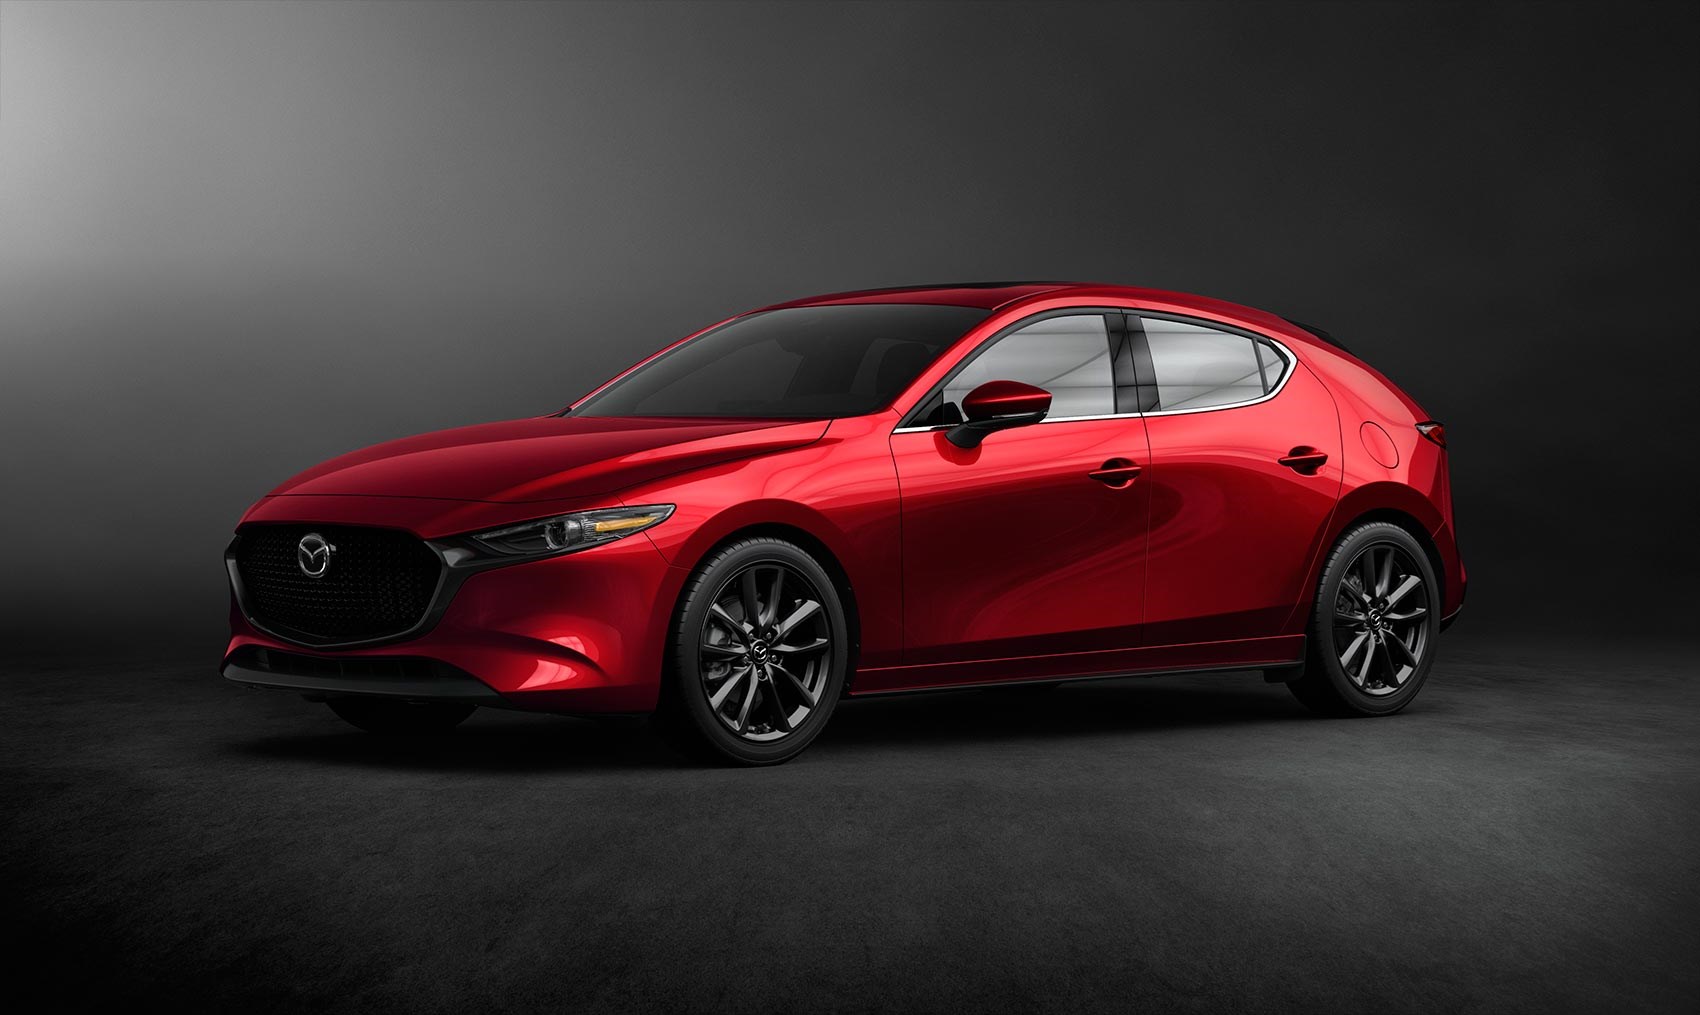 New 2019 Mazda 3 news and pictures | CAR Magazine